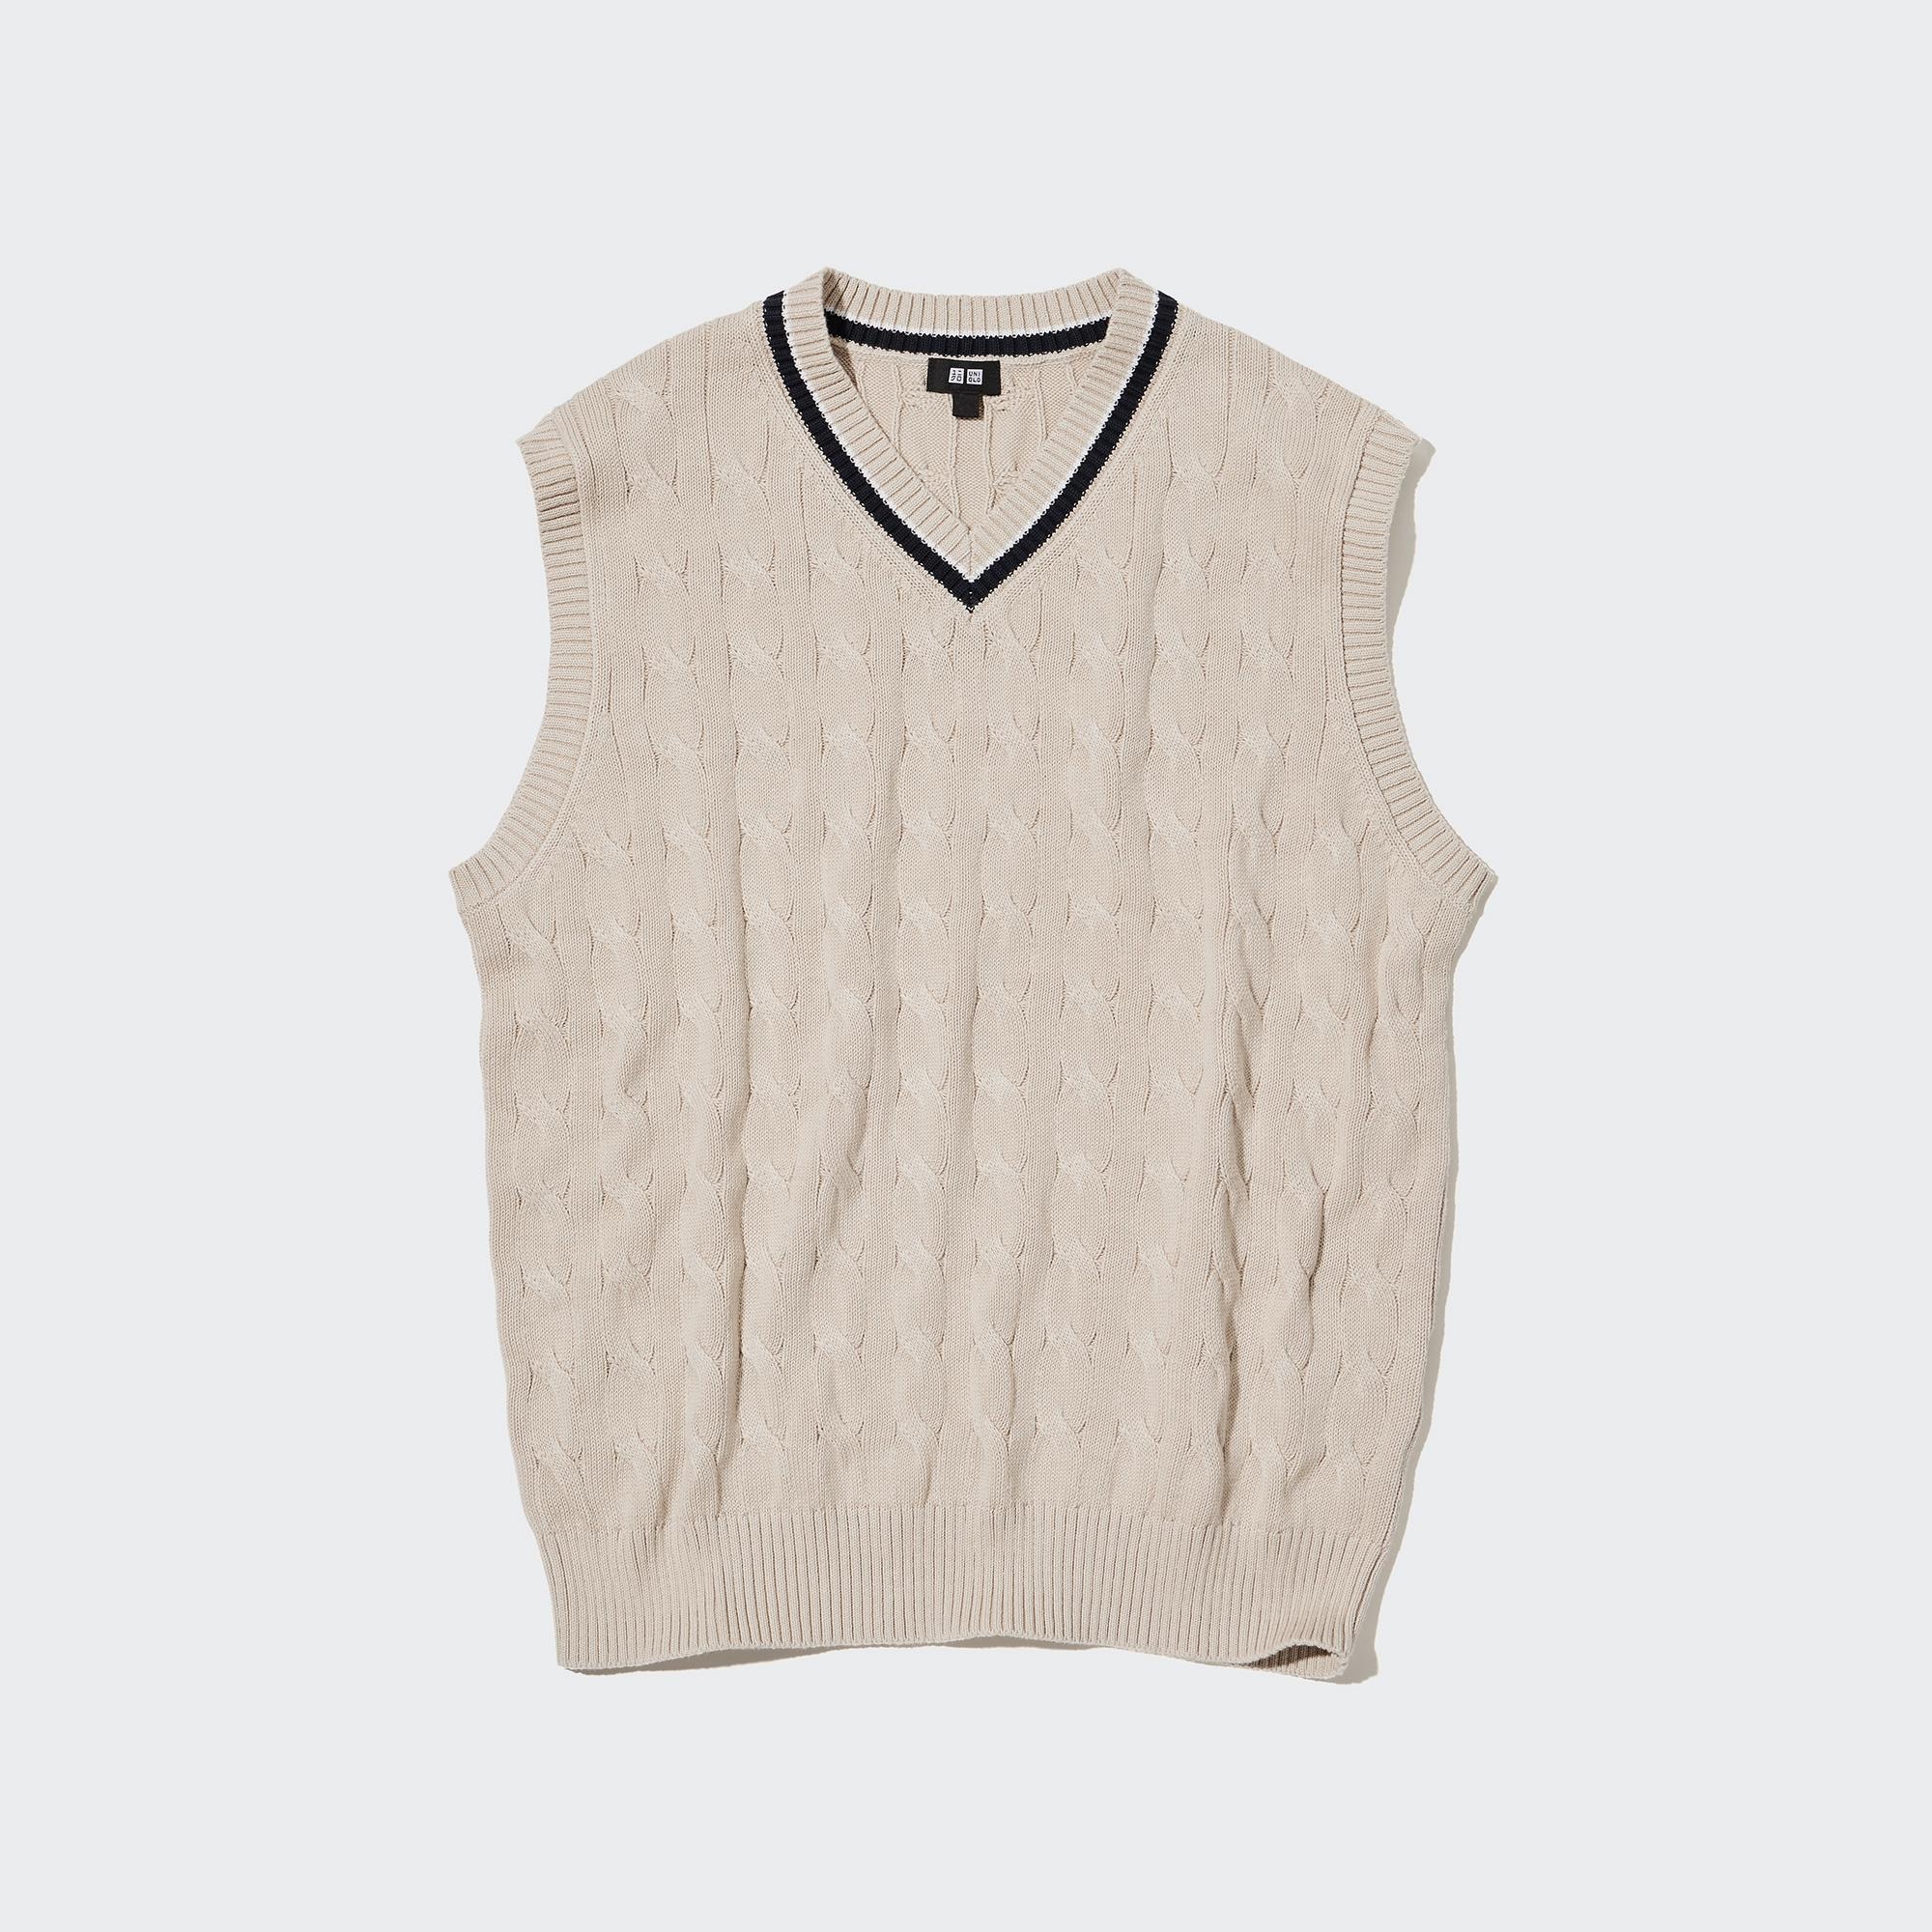 MENS CABLE V NECK KNITTED VEST  UNIQLO VN